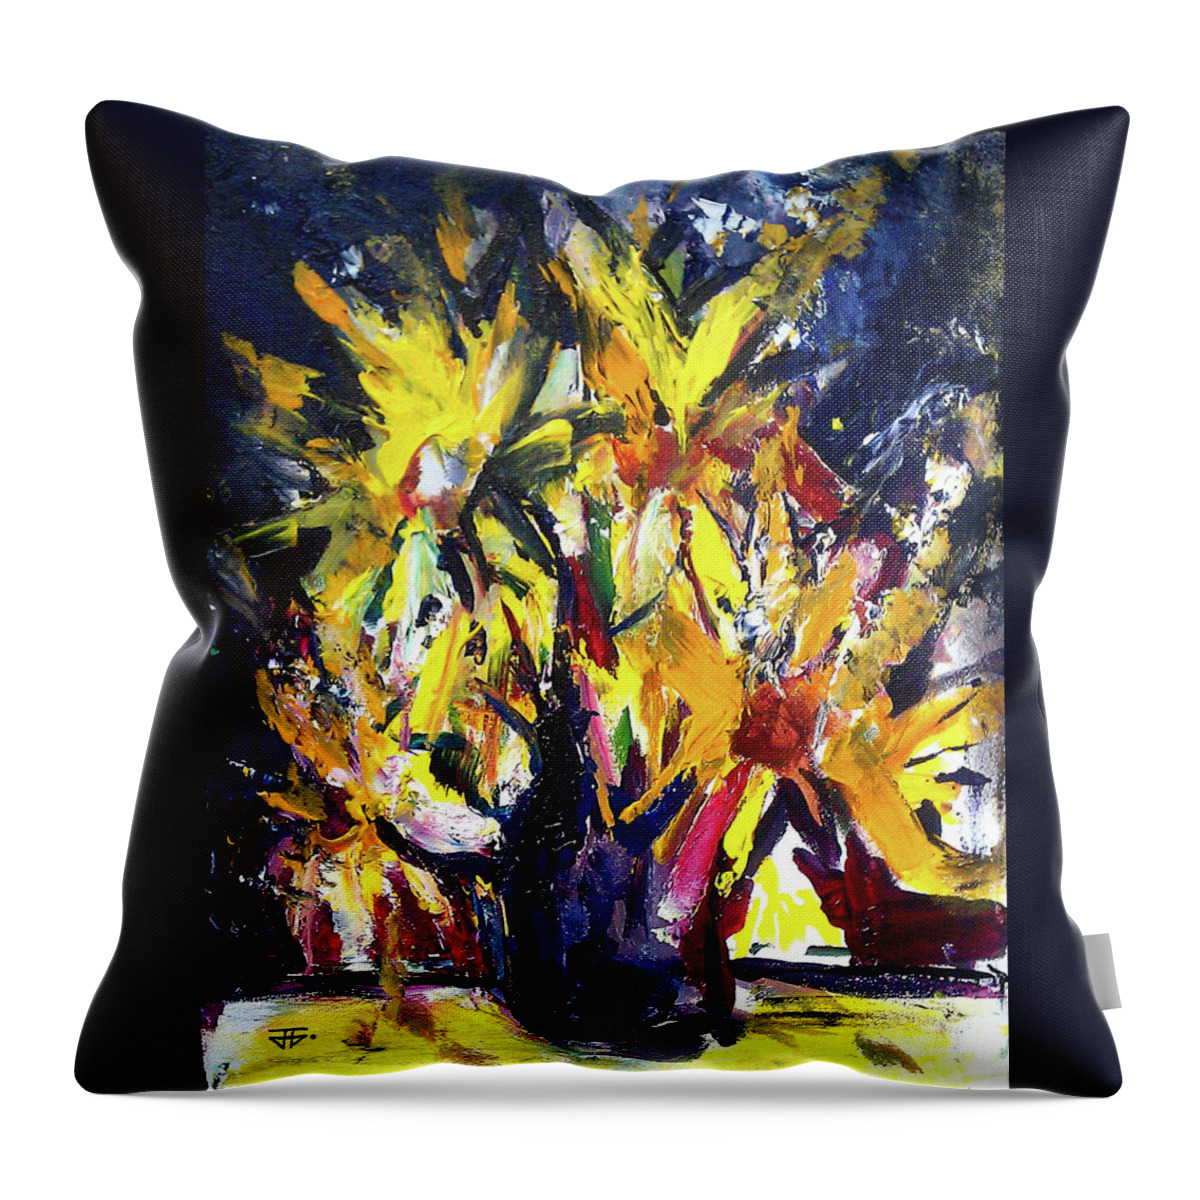 Sunflower Throw Pillow featuring the painting Sun Flower Night by John Gholson